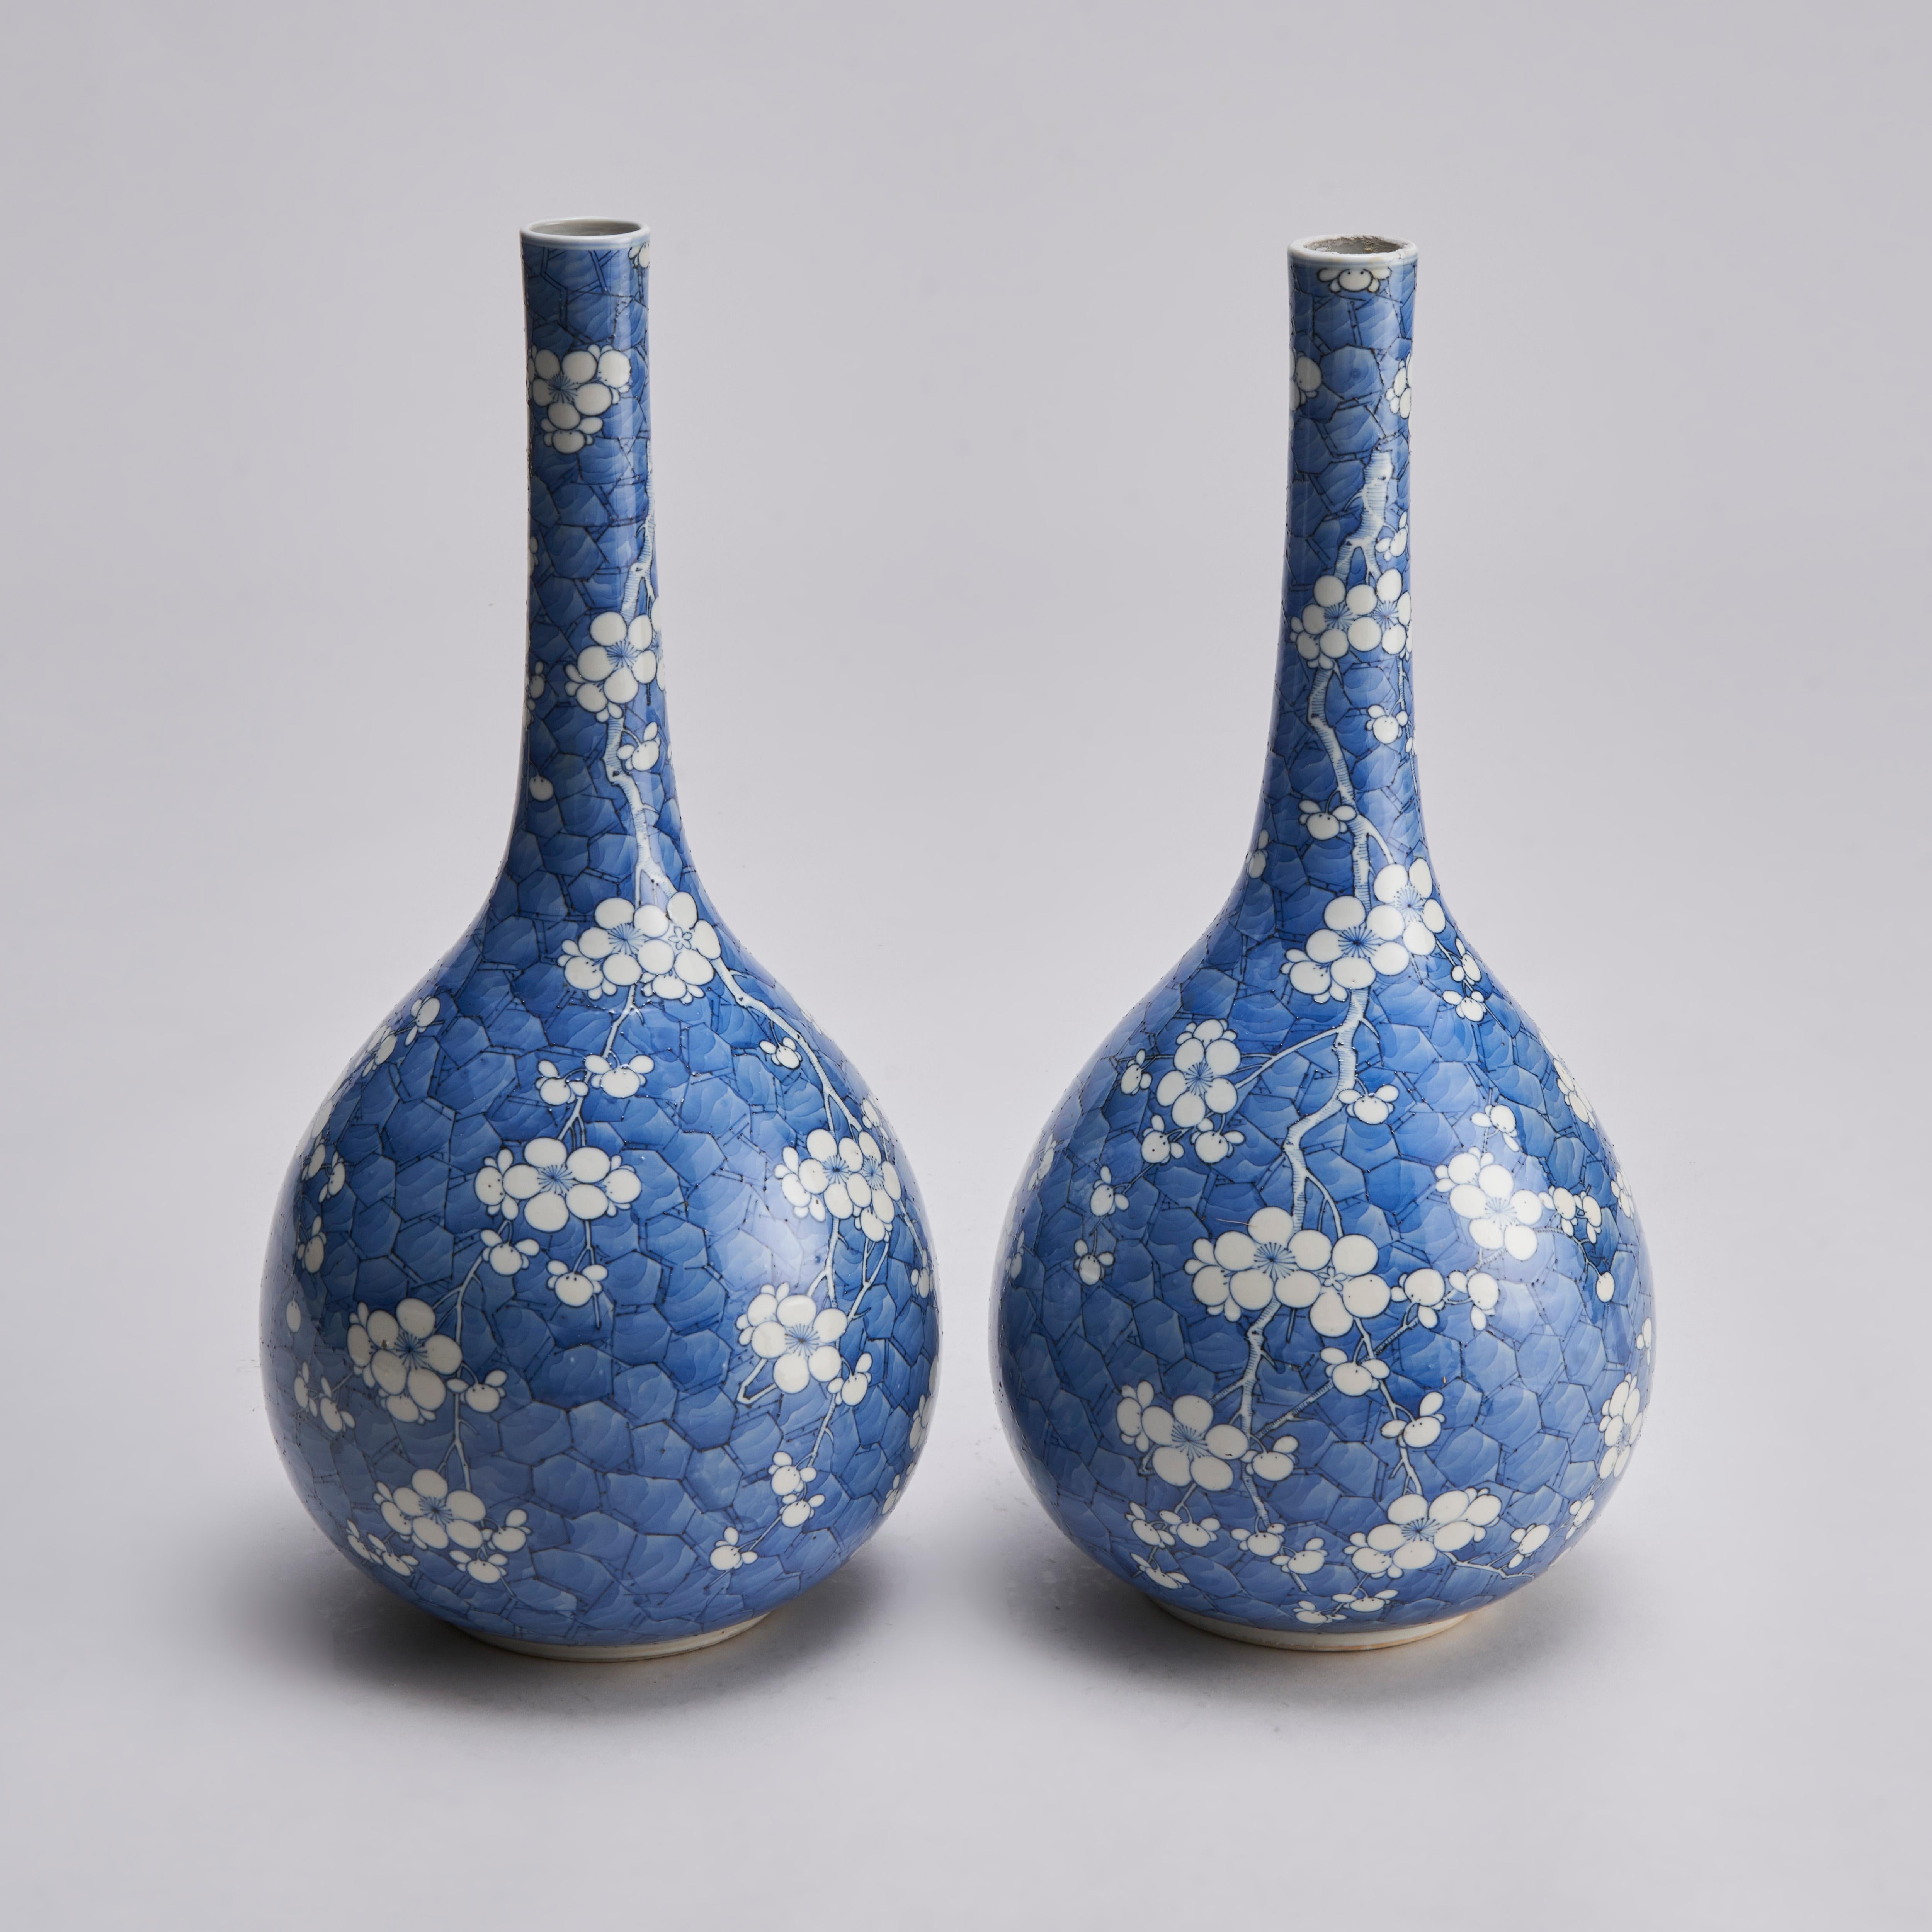 From our collection of antique Chinese porcelain, this pair of 19th century blue and white bottle vases (46cm in height) with very fine tapered necks and fine decoration of plum blossom on a cracked ice ground.

Contact us for further information,